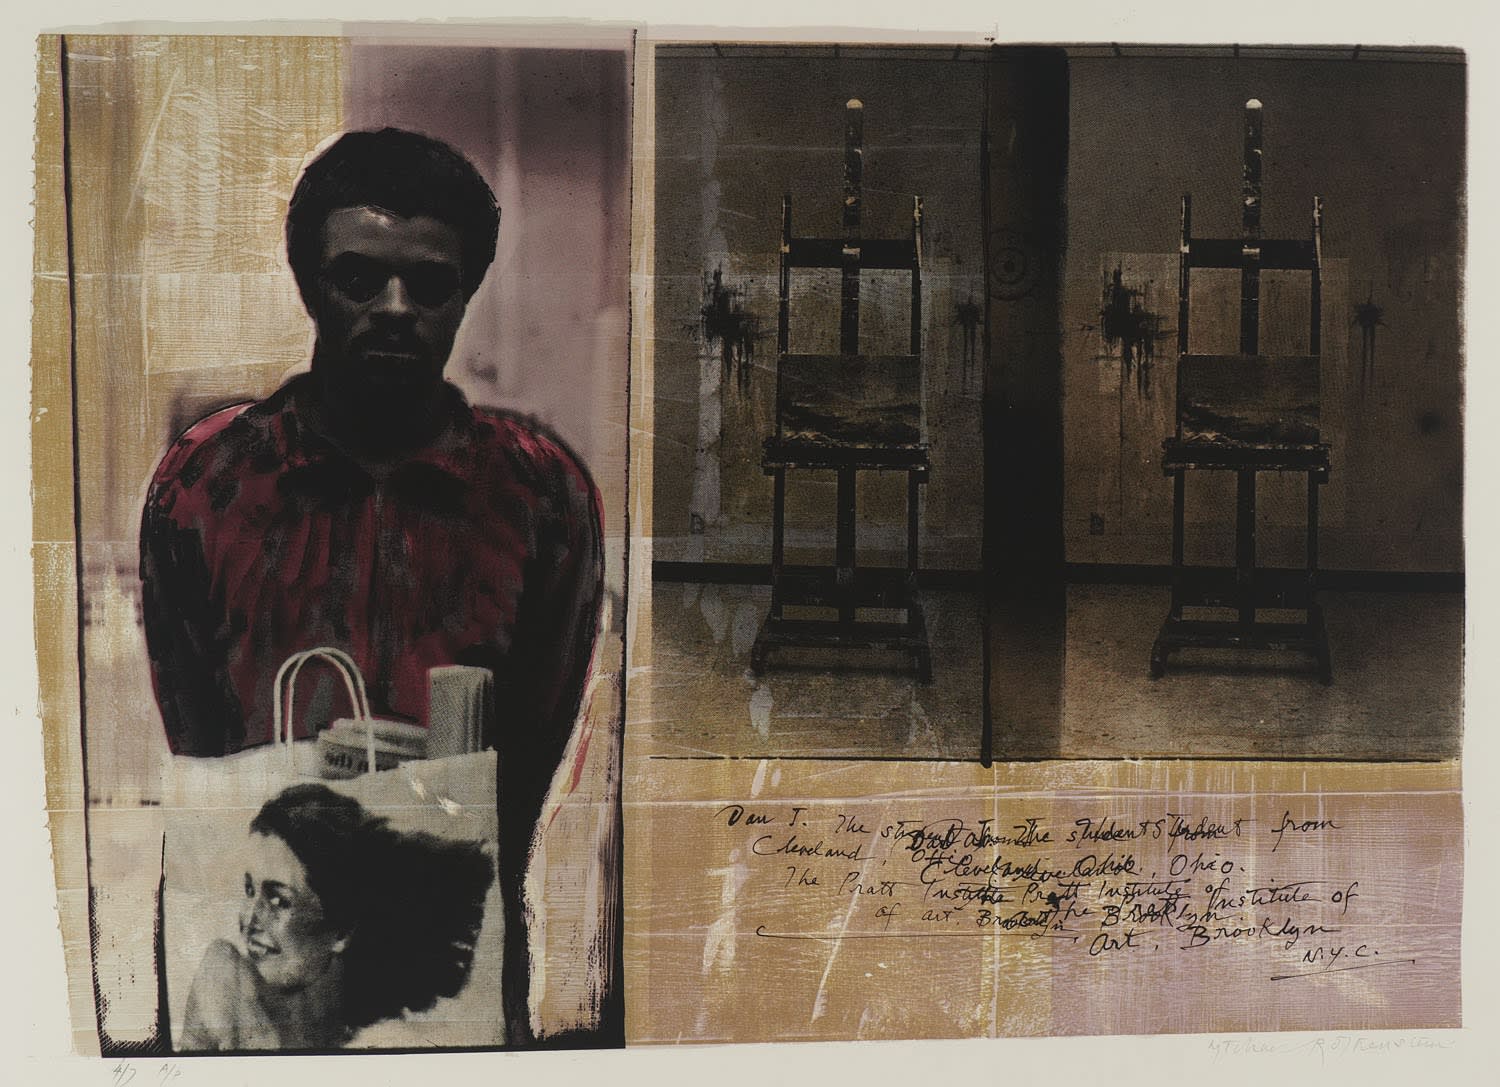 Michael Rothenstein (1908-1993) The Shooting of George Wallace 1973 Photographic silkscreen on paper 55.7 × 76.2 cm Ben Uri Collection © Michael Rothenstein estate To see and discover more about this artist click here